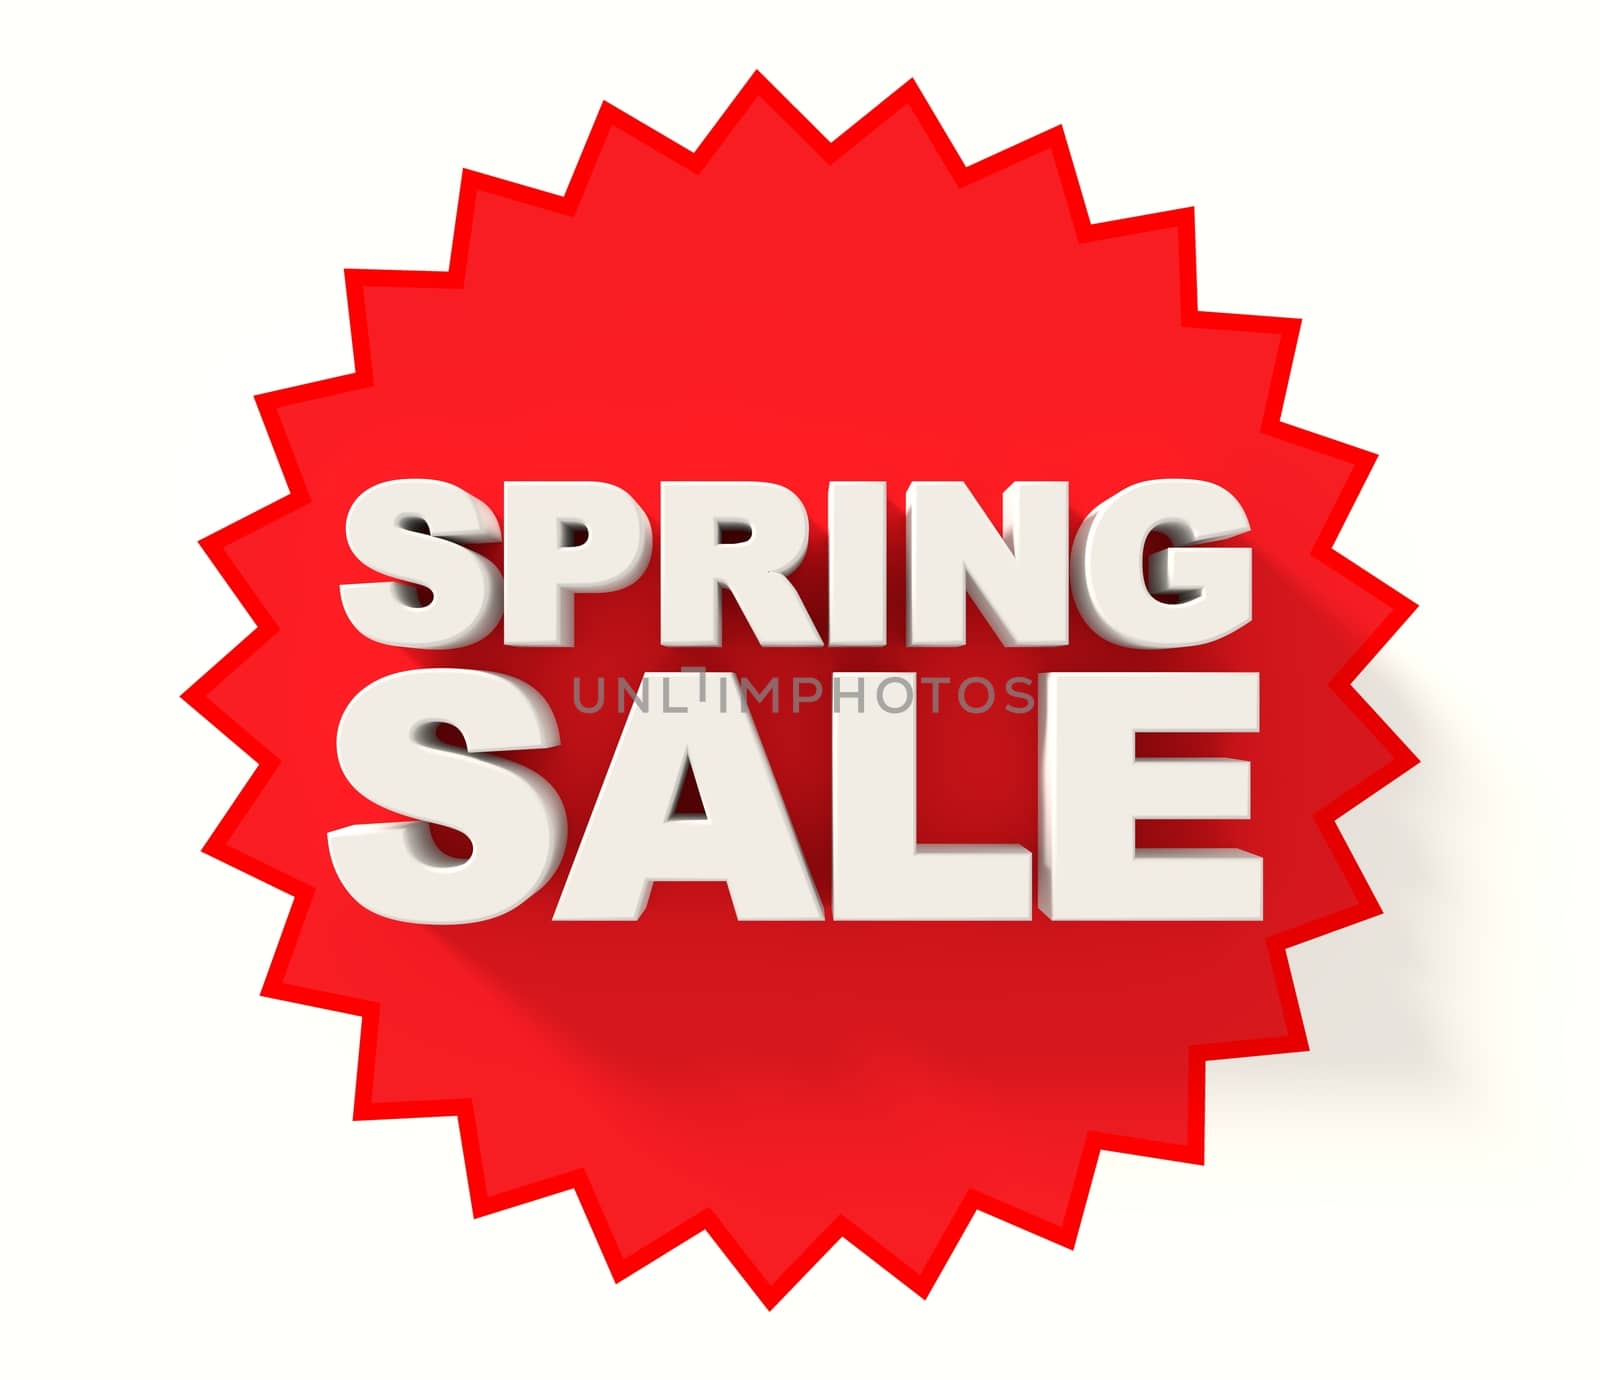 Spring sale sign, white letters on red star background